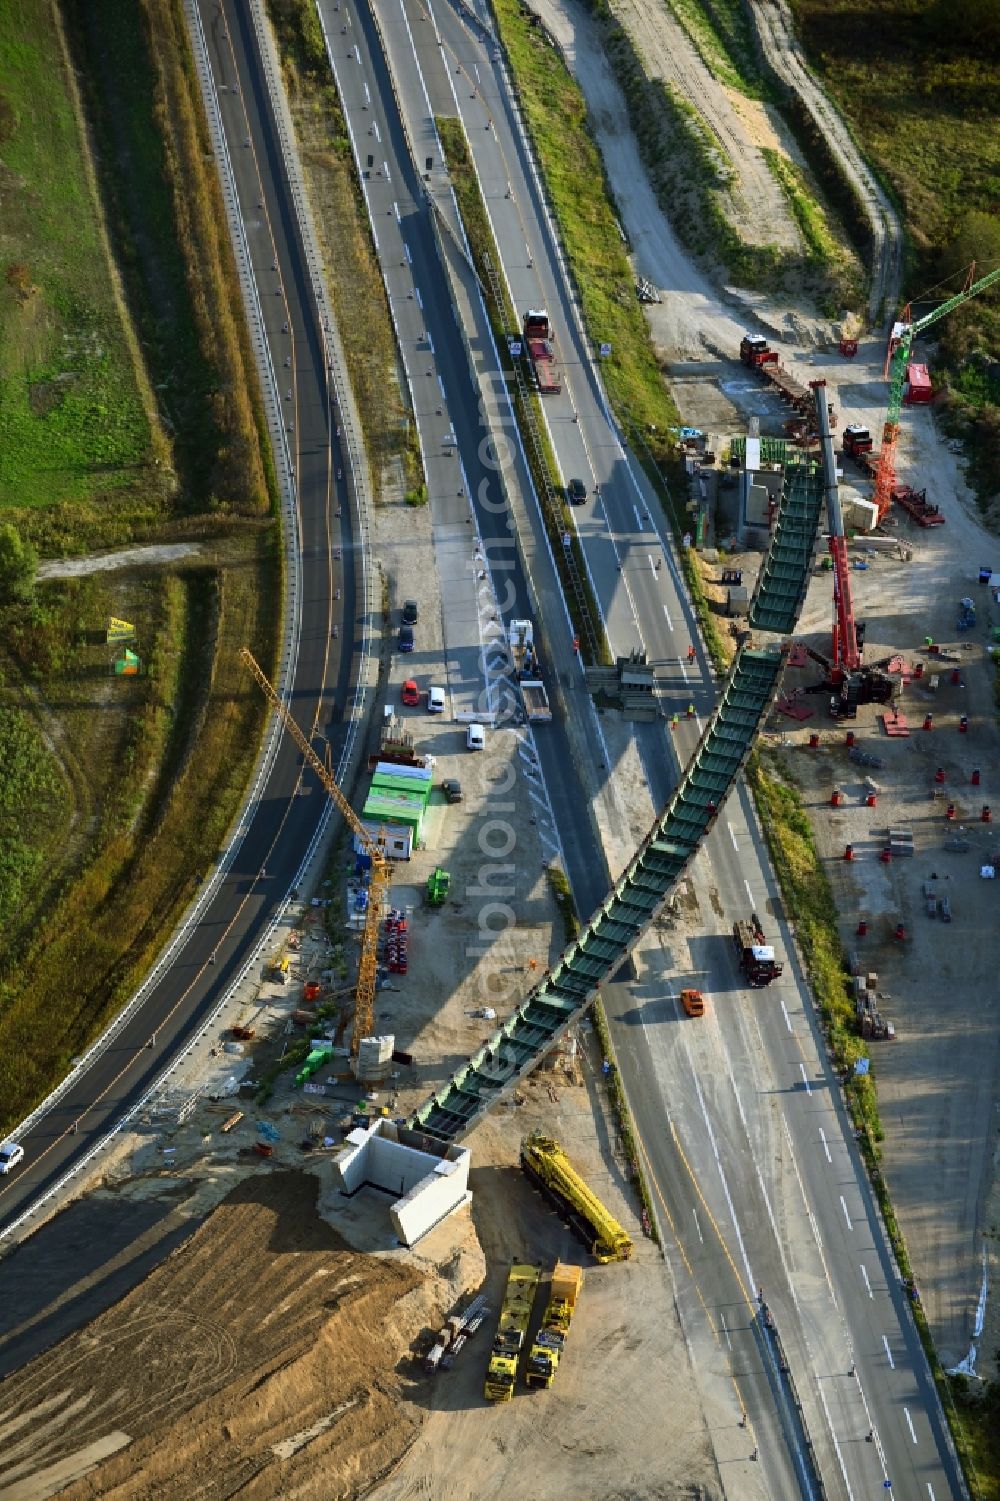 Aerial photograph Schönerlinde - New construction of the motorway route BAB A114 on Dreick Pankow in Schoenerlinde in the state Brandenburg, Germany